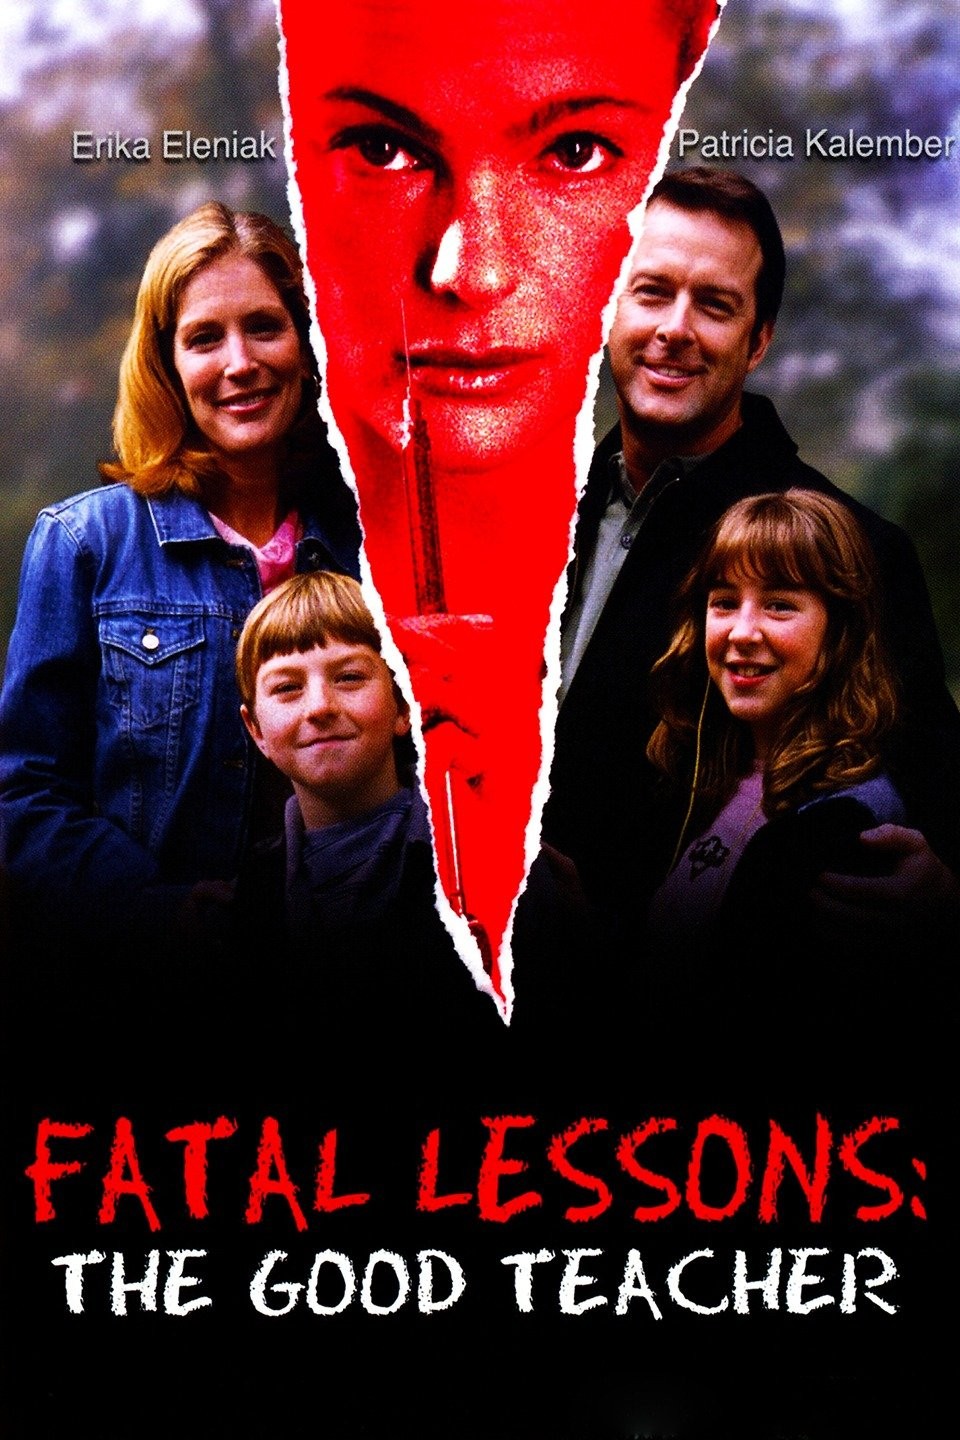 Fatal lessons in pandemic